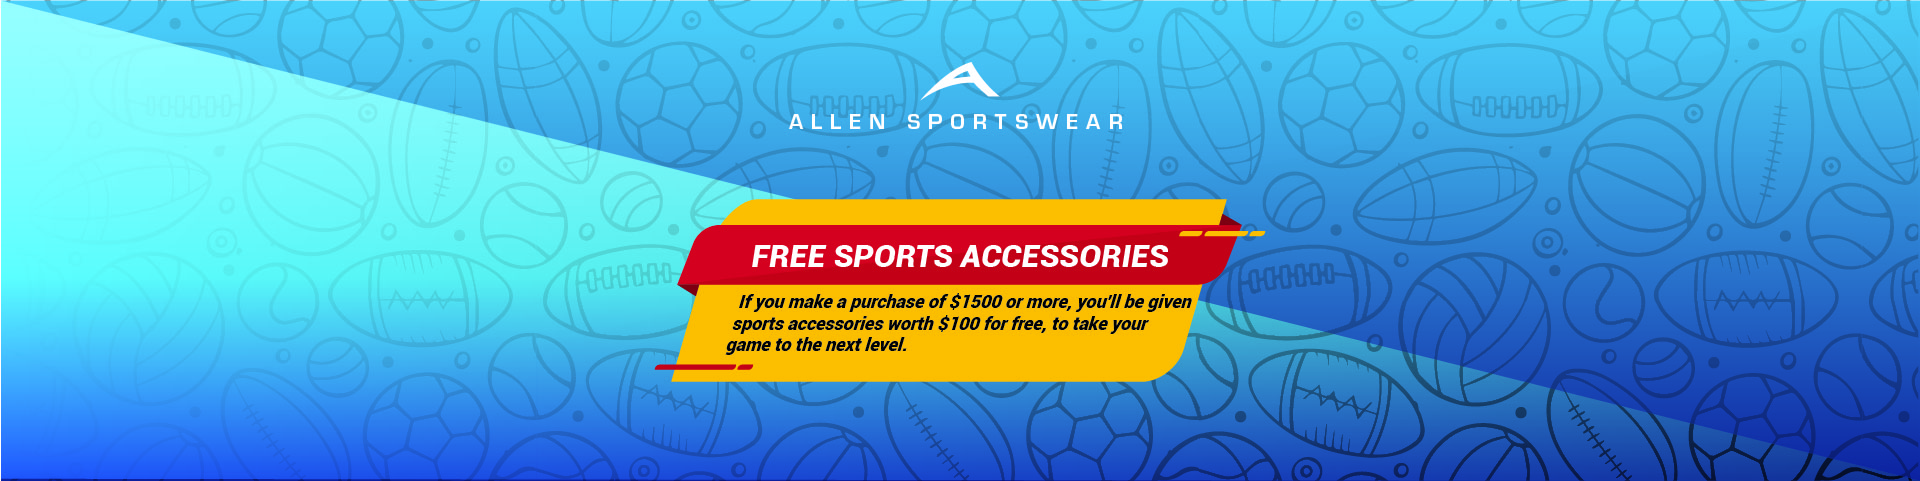 Free Sports Accesories